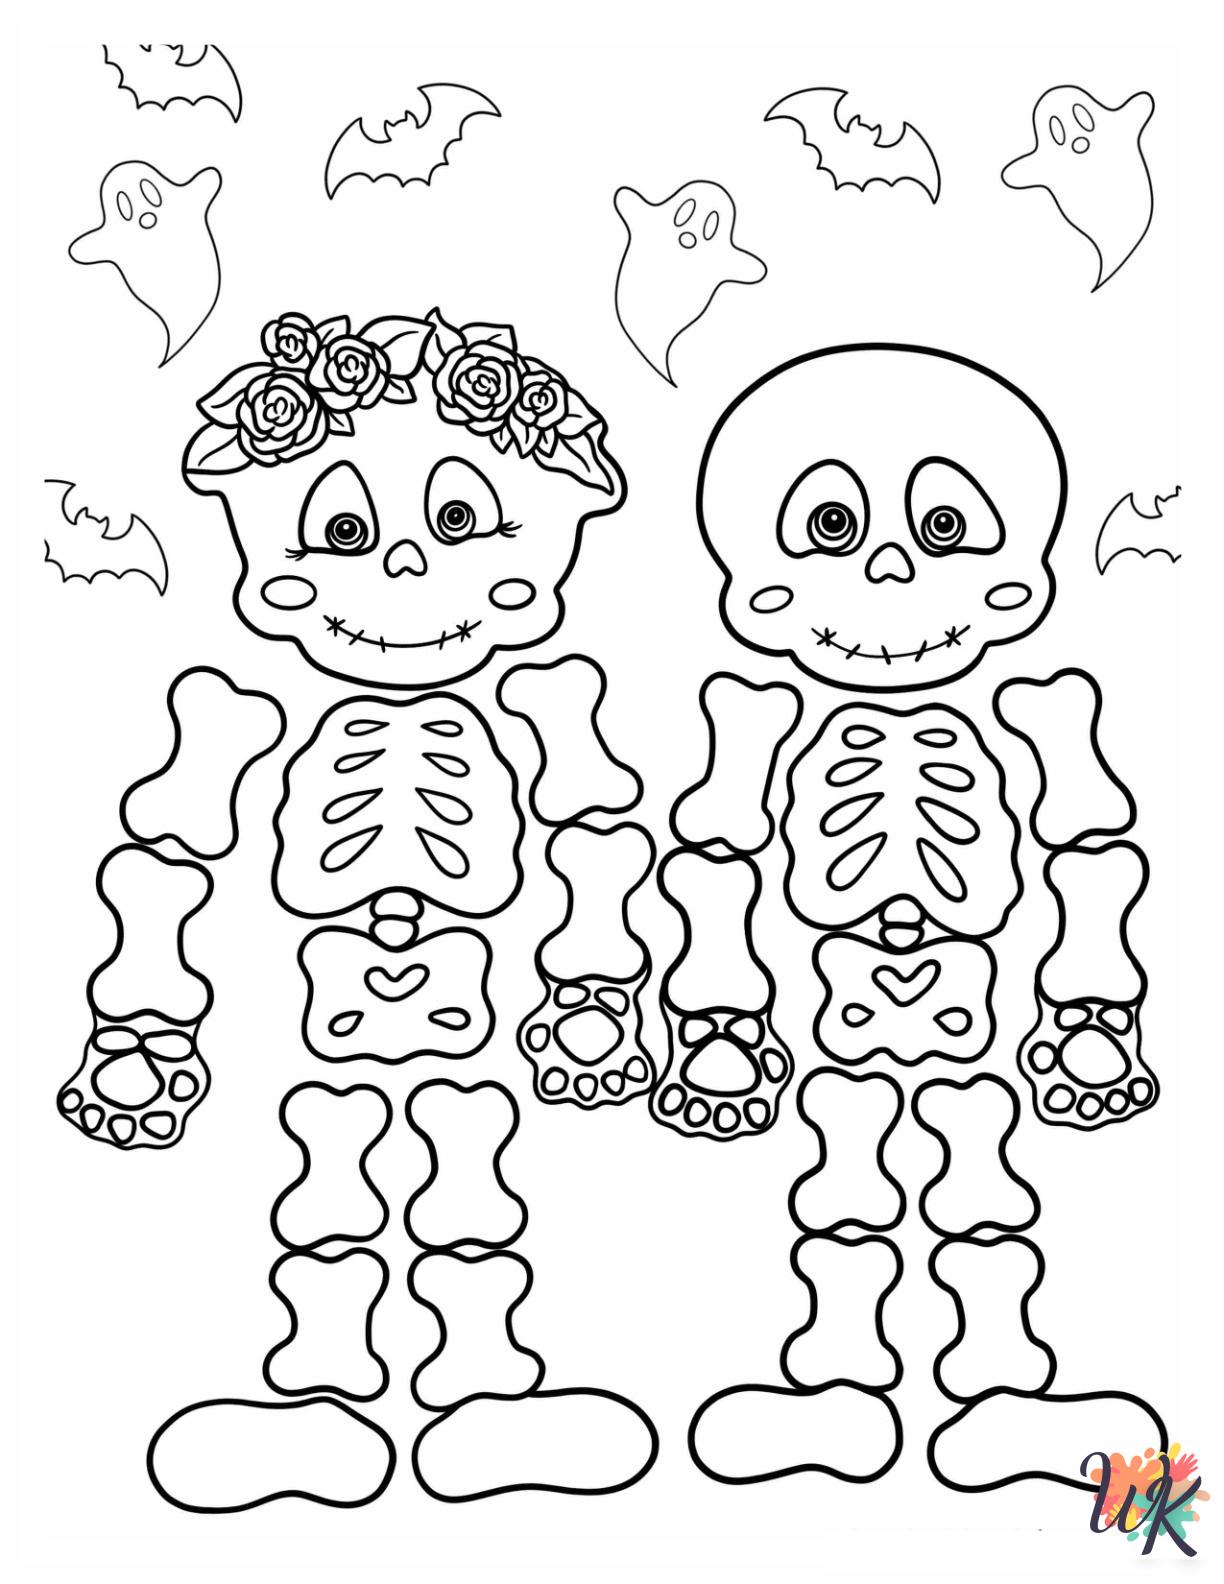 easy Skeleton coloring pages